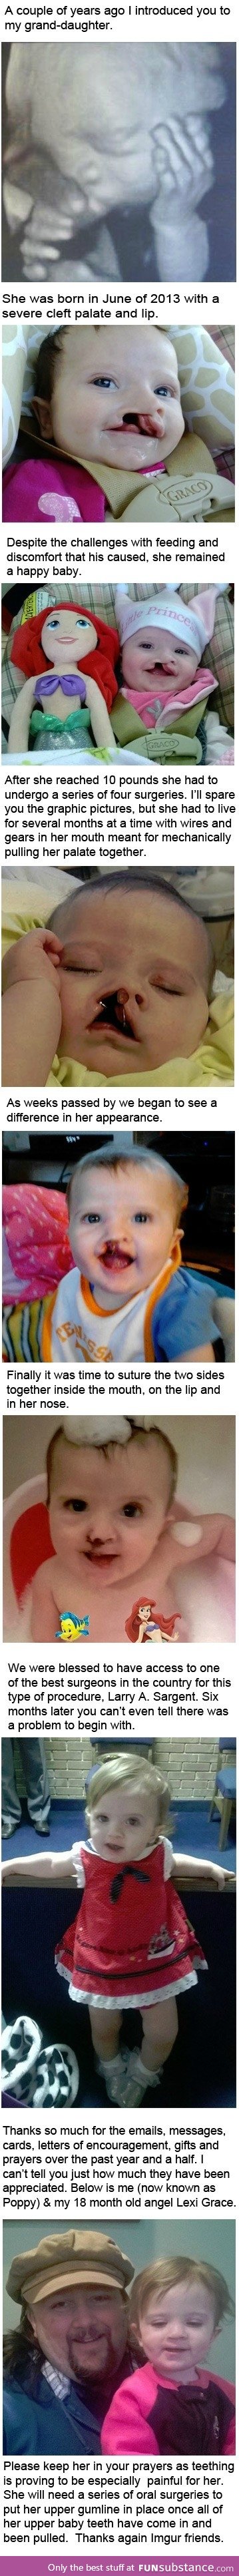 A story of a little girls severe cleft palate and lip